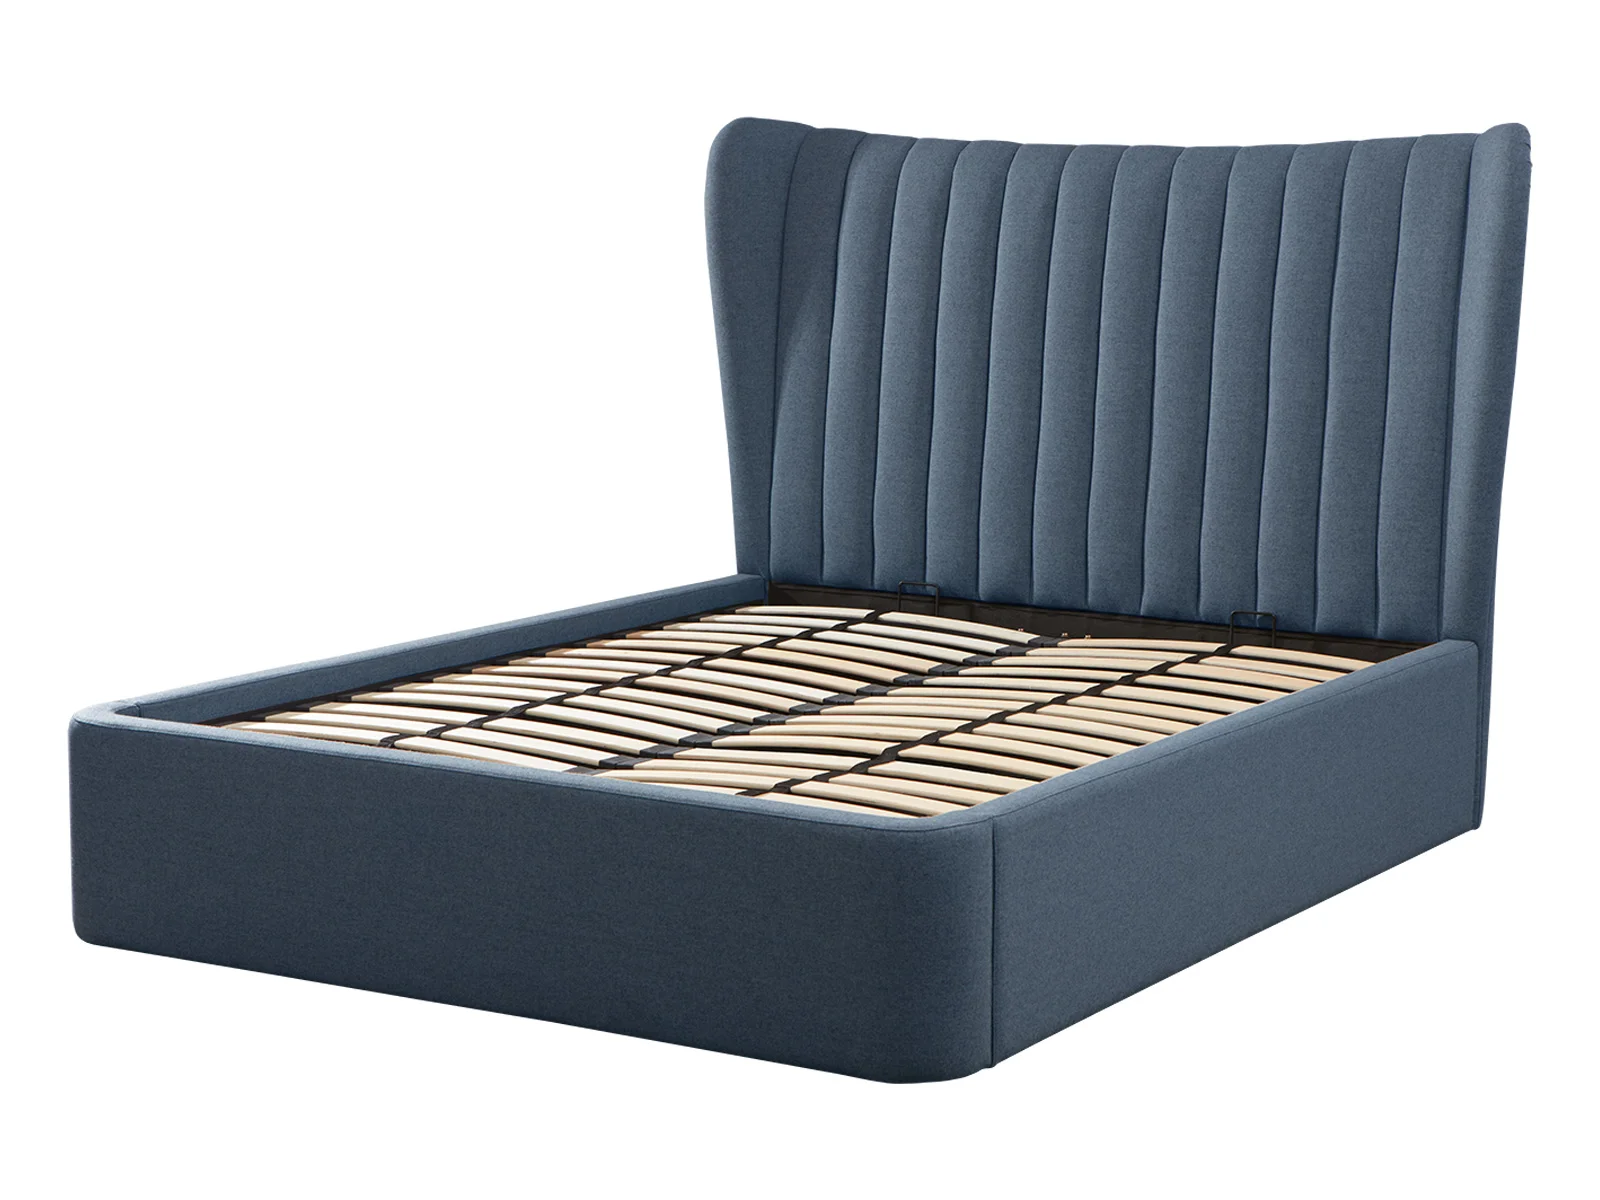 Super King Size Ottoman Bed